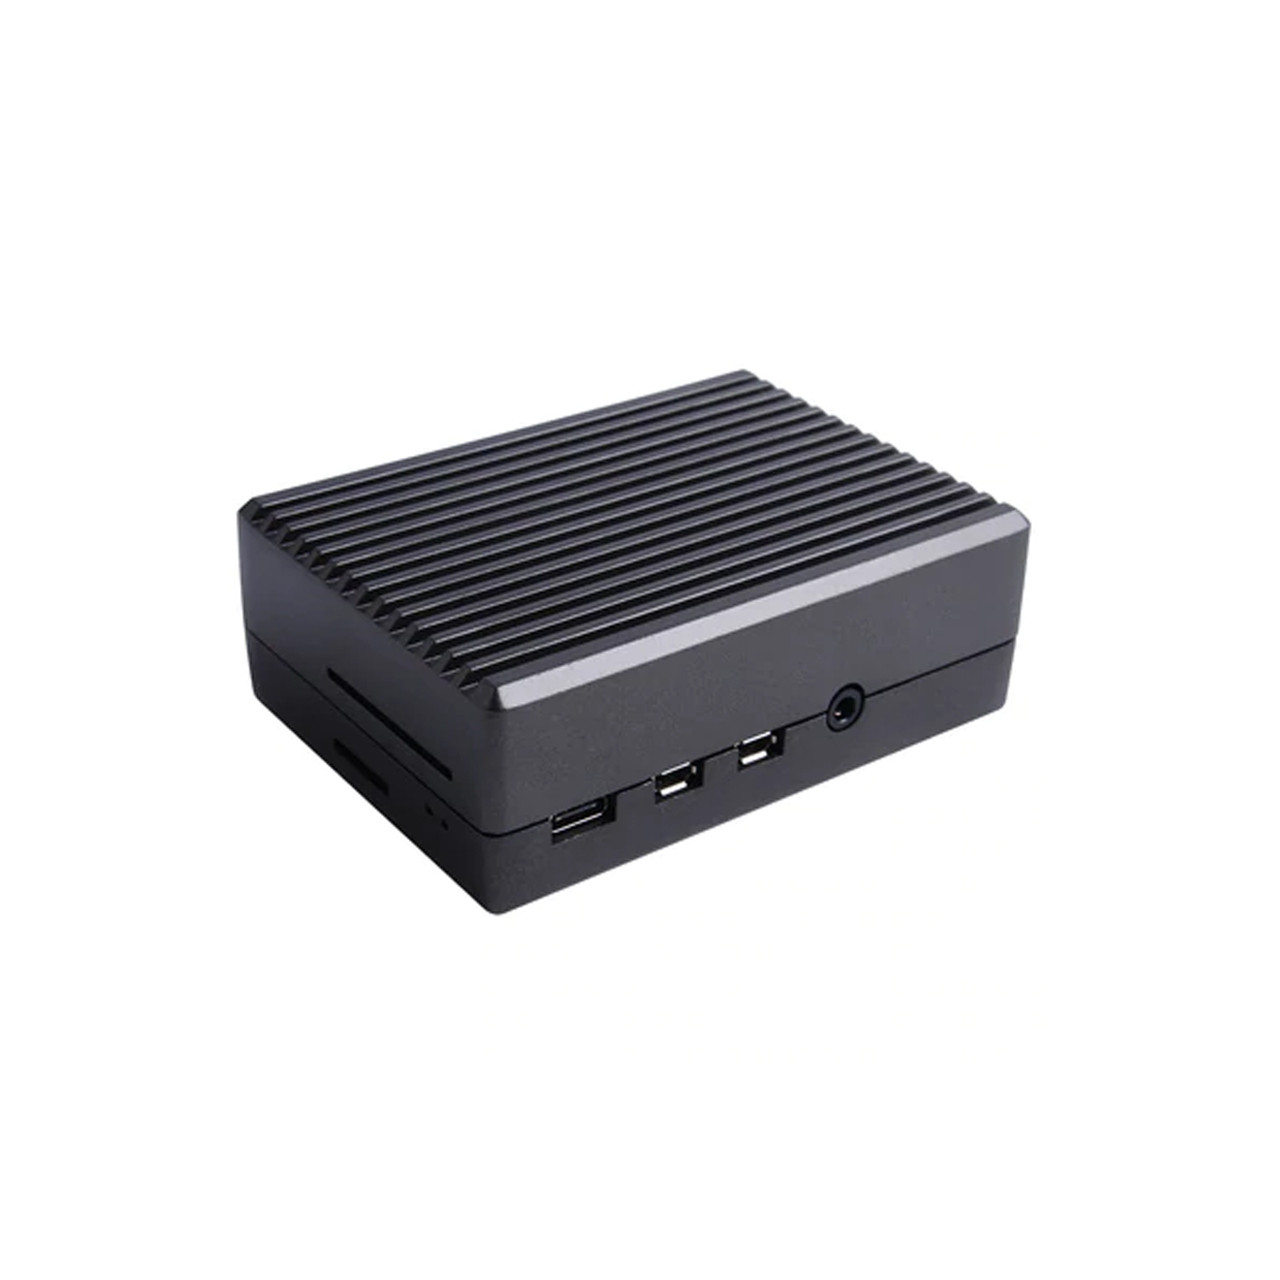 AAAwave Raspberry Pi 4 Black Aluminum Cooling Case With Black Power Supply and Power Switch Combo Set